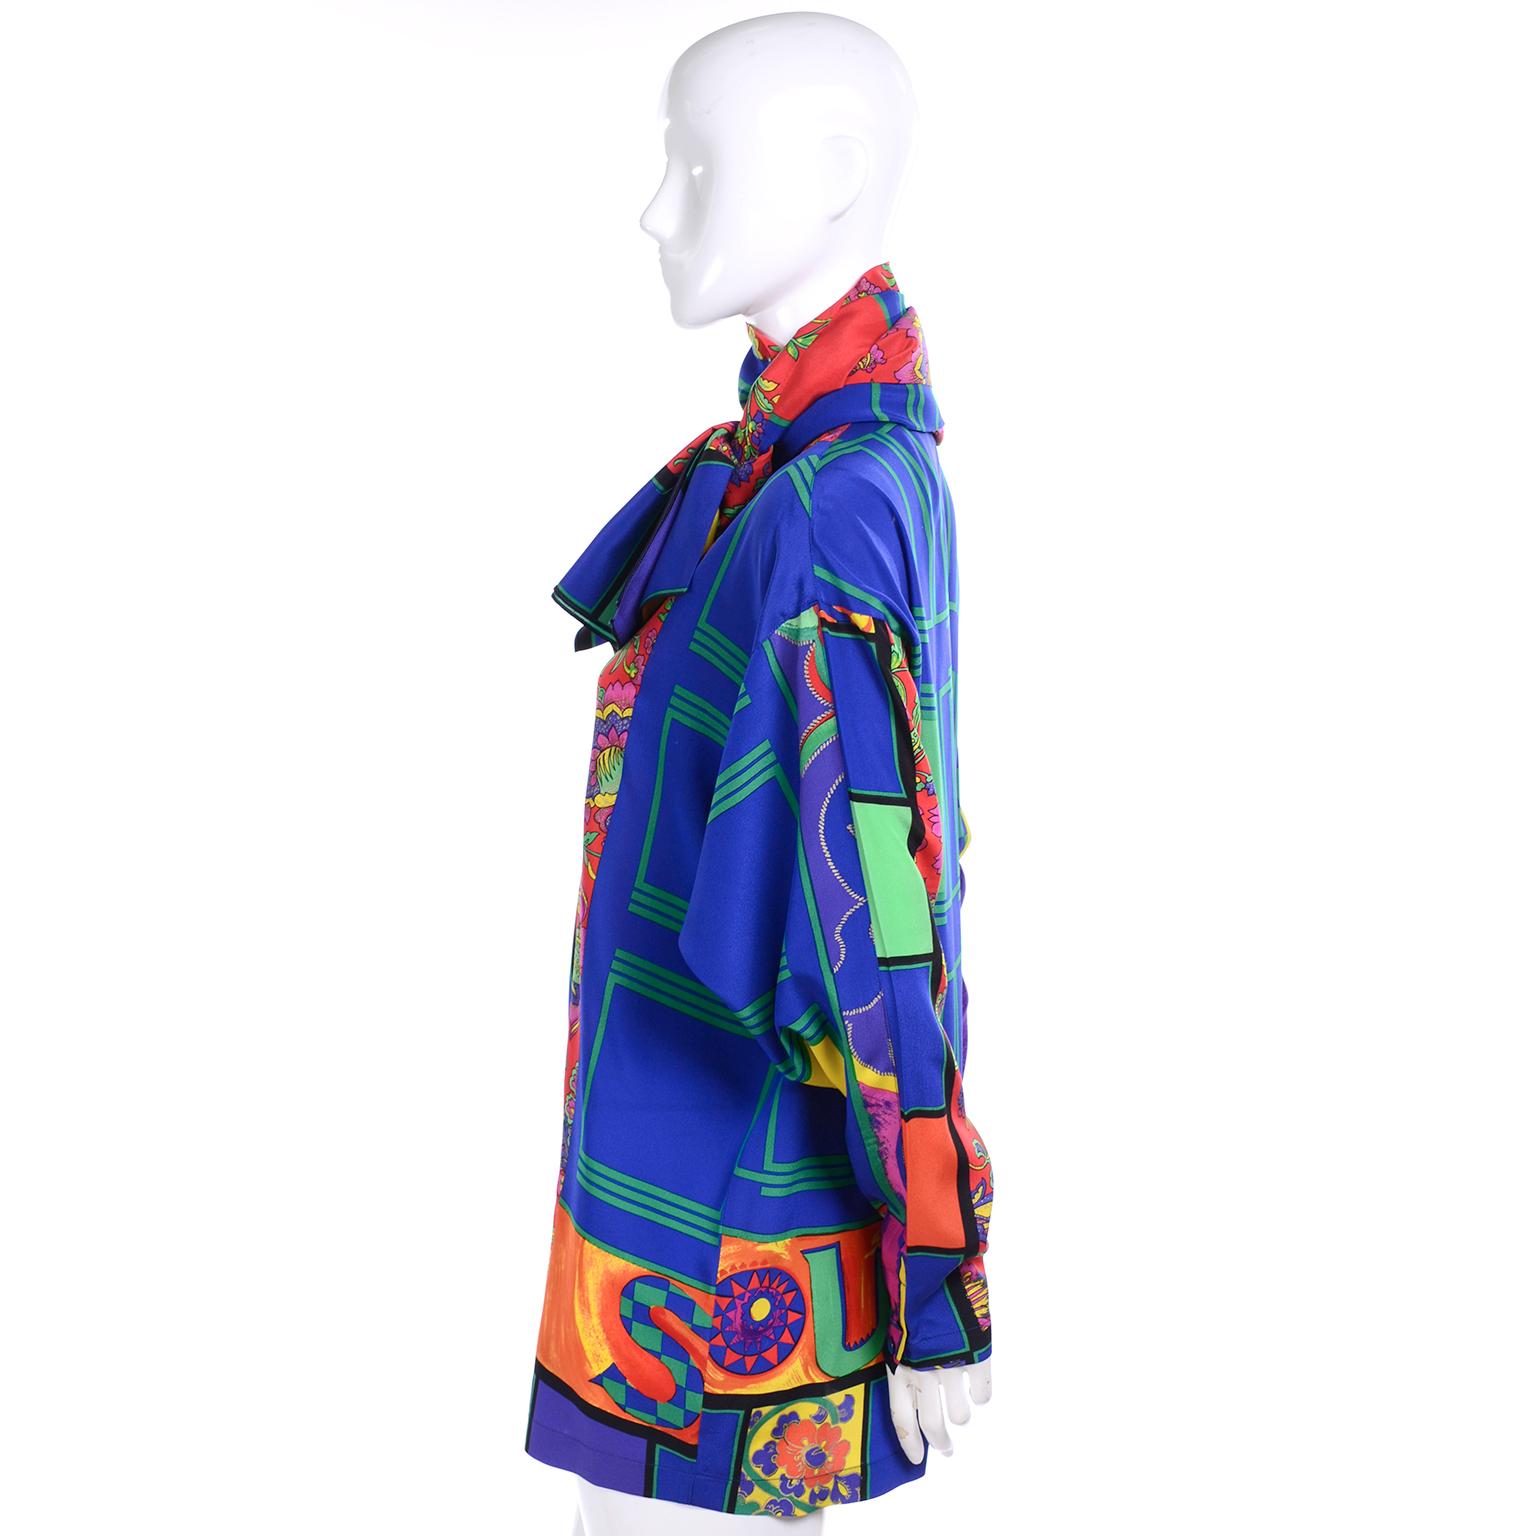 Gianni Versace Early 1990s Bright Colorful Vintage Silk Print Shirt & Huge Scarf In Excellent Condition For Sale In Portland, OR